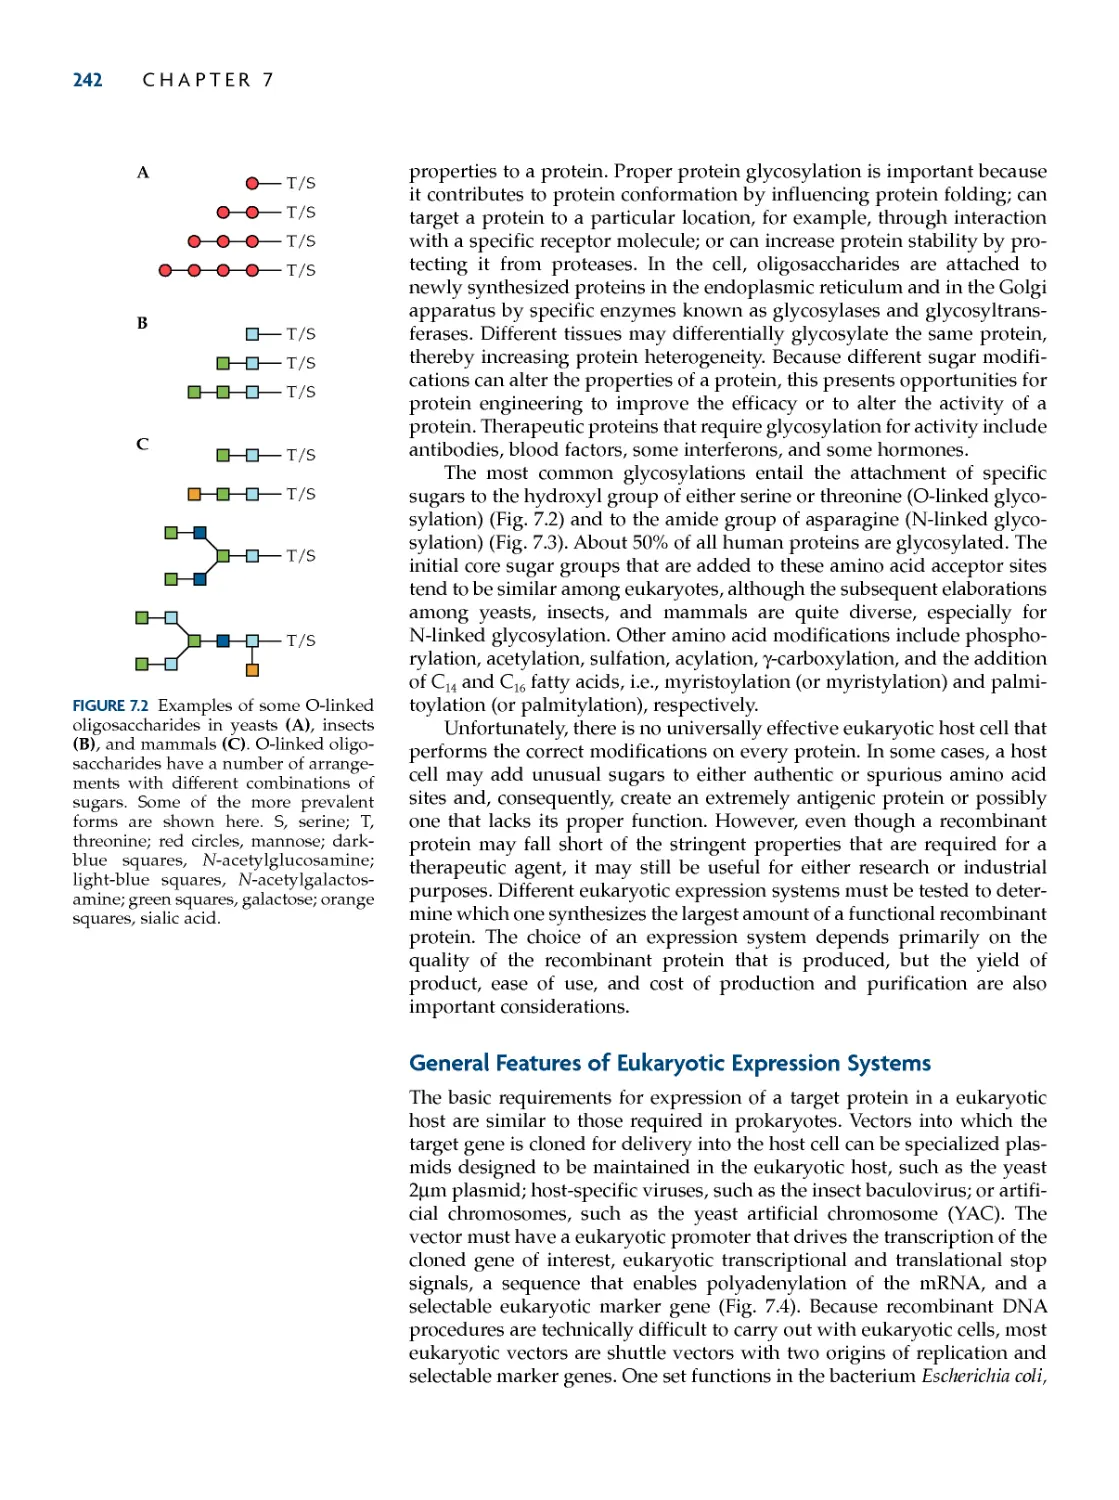 General Features of Eukaryotic Expression Systems